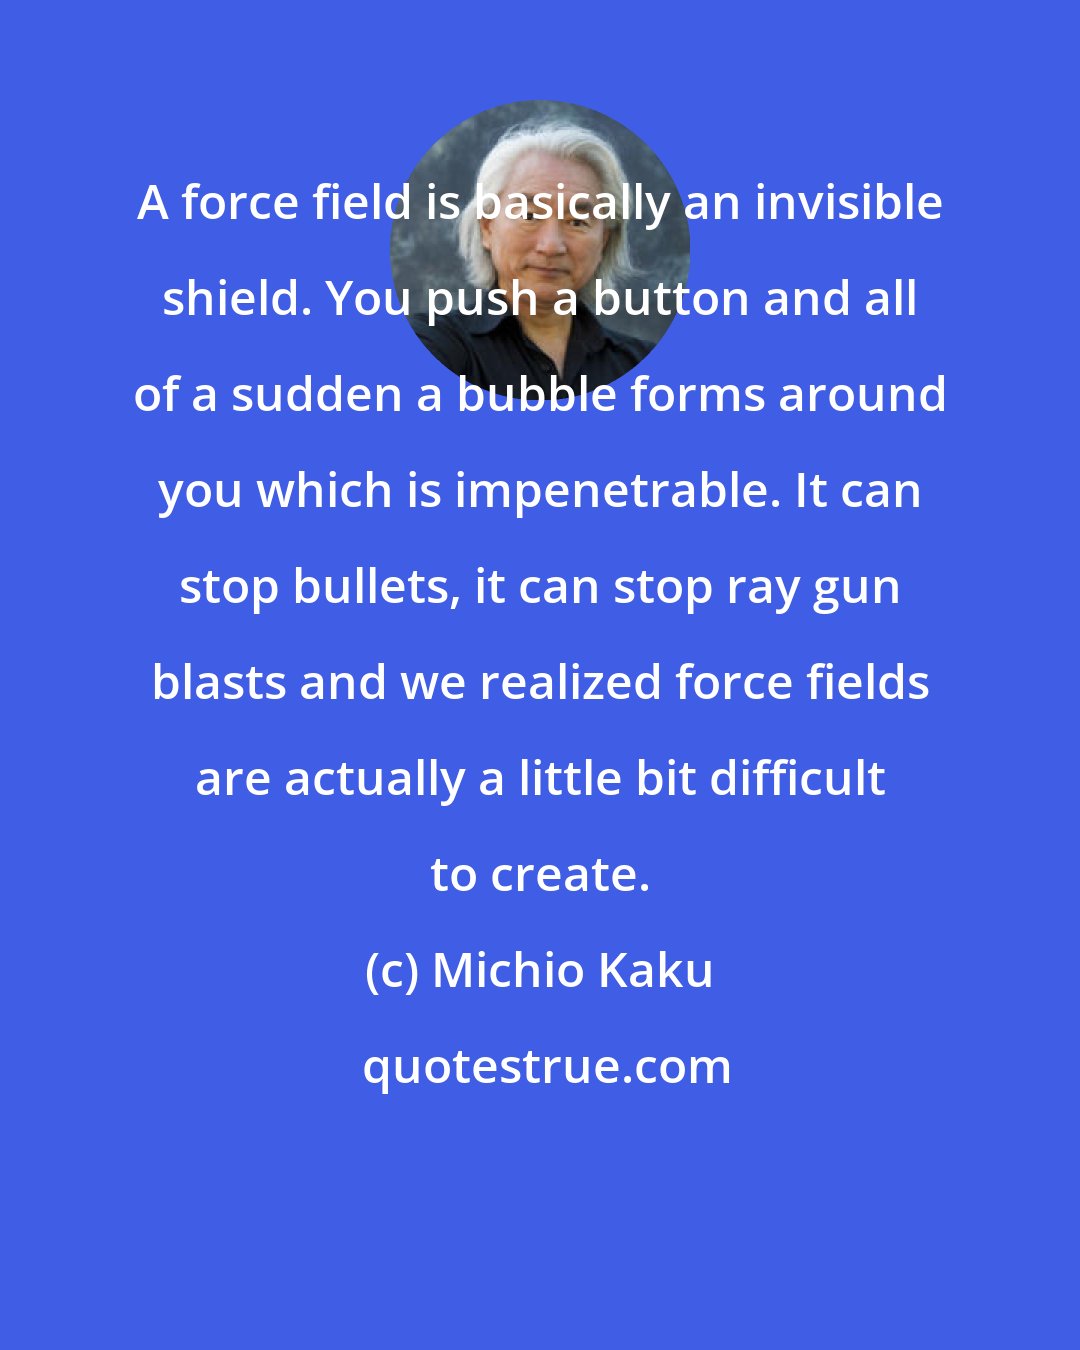 Michio Kaku: A force field is basically an invisible shield. You push a button and all of a sudden a bubble forms around you which is impenetrable. It can stop bullets, it can stop ray gun blasts and we realized force fields are actually a little bit difficult to create.